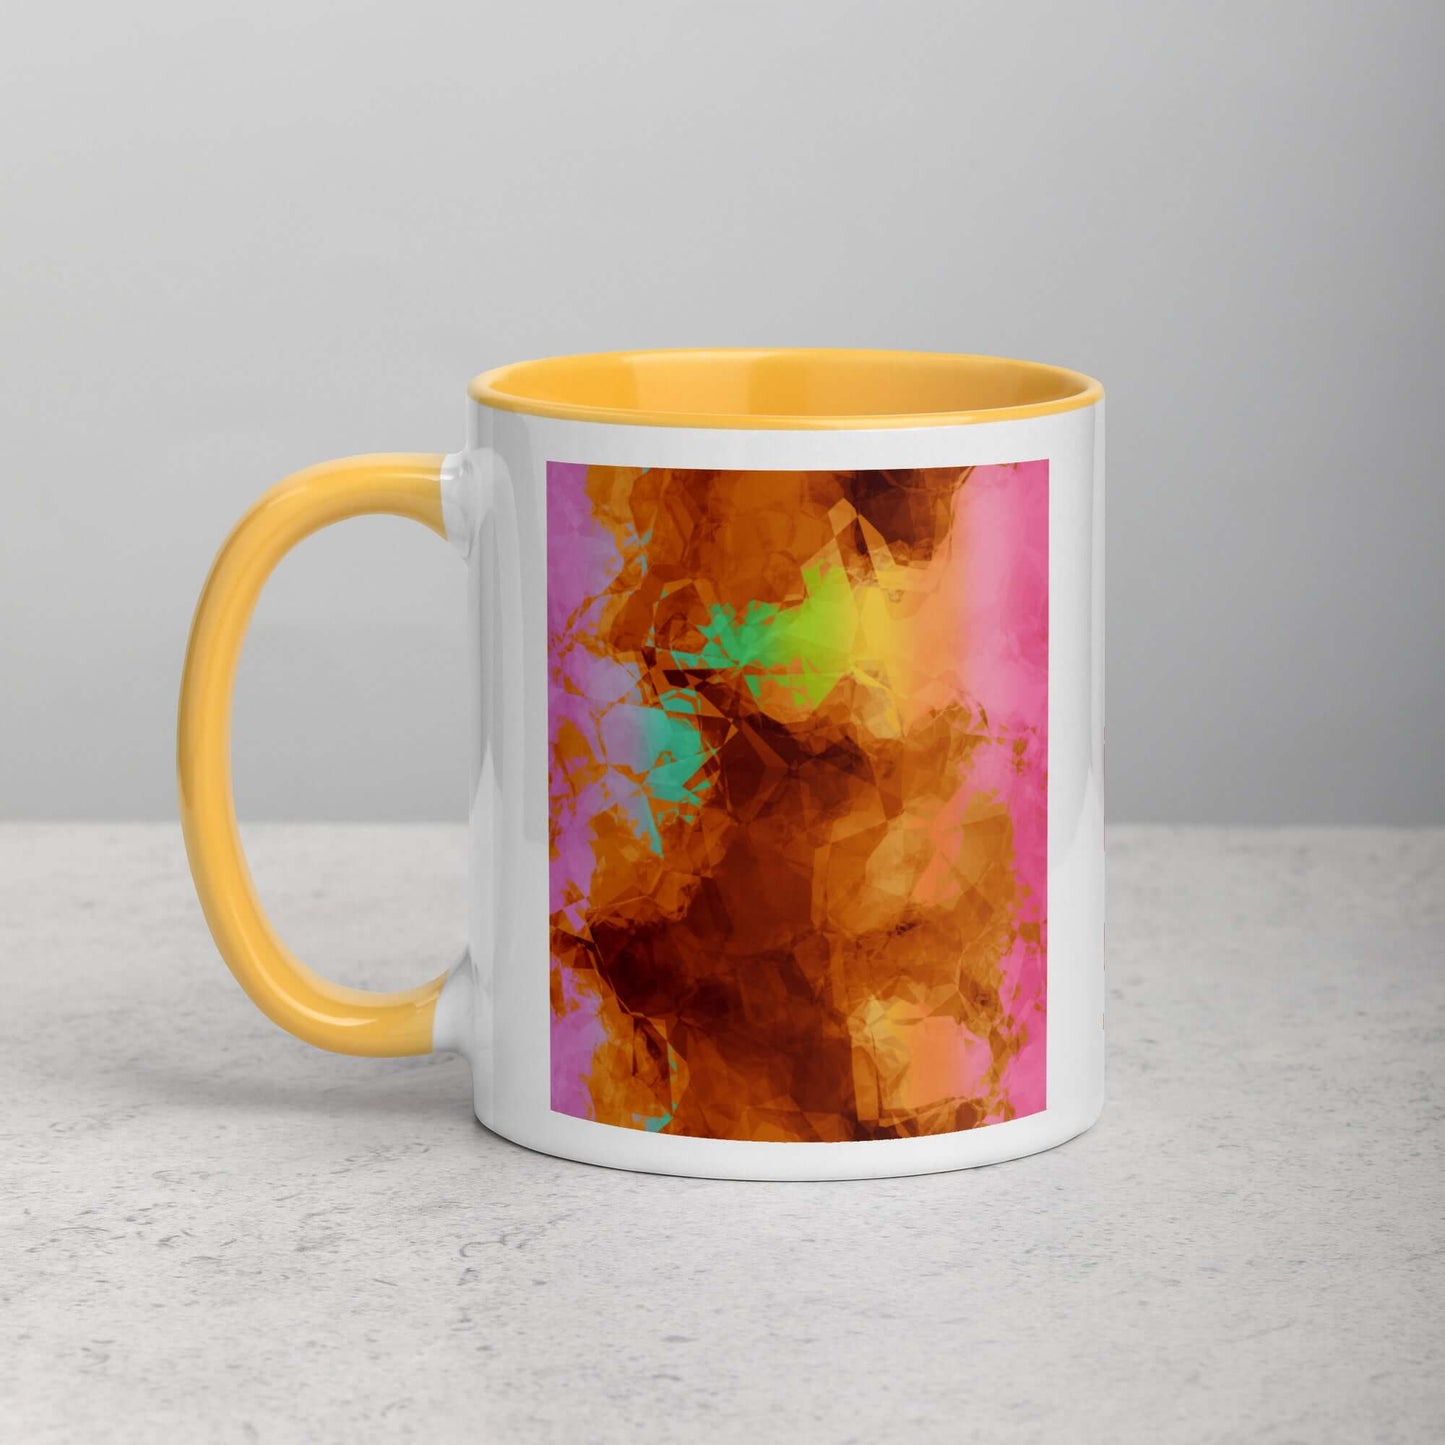 Abstract Smoky Rainbow on Brown Background “Burnt Rainbow Crumple” Abstract Art Mug with Golden Yellow Color Inside Left Handed Front View